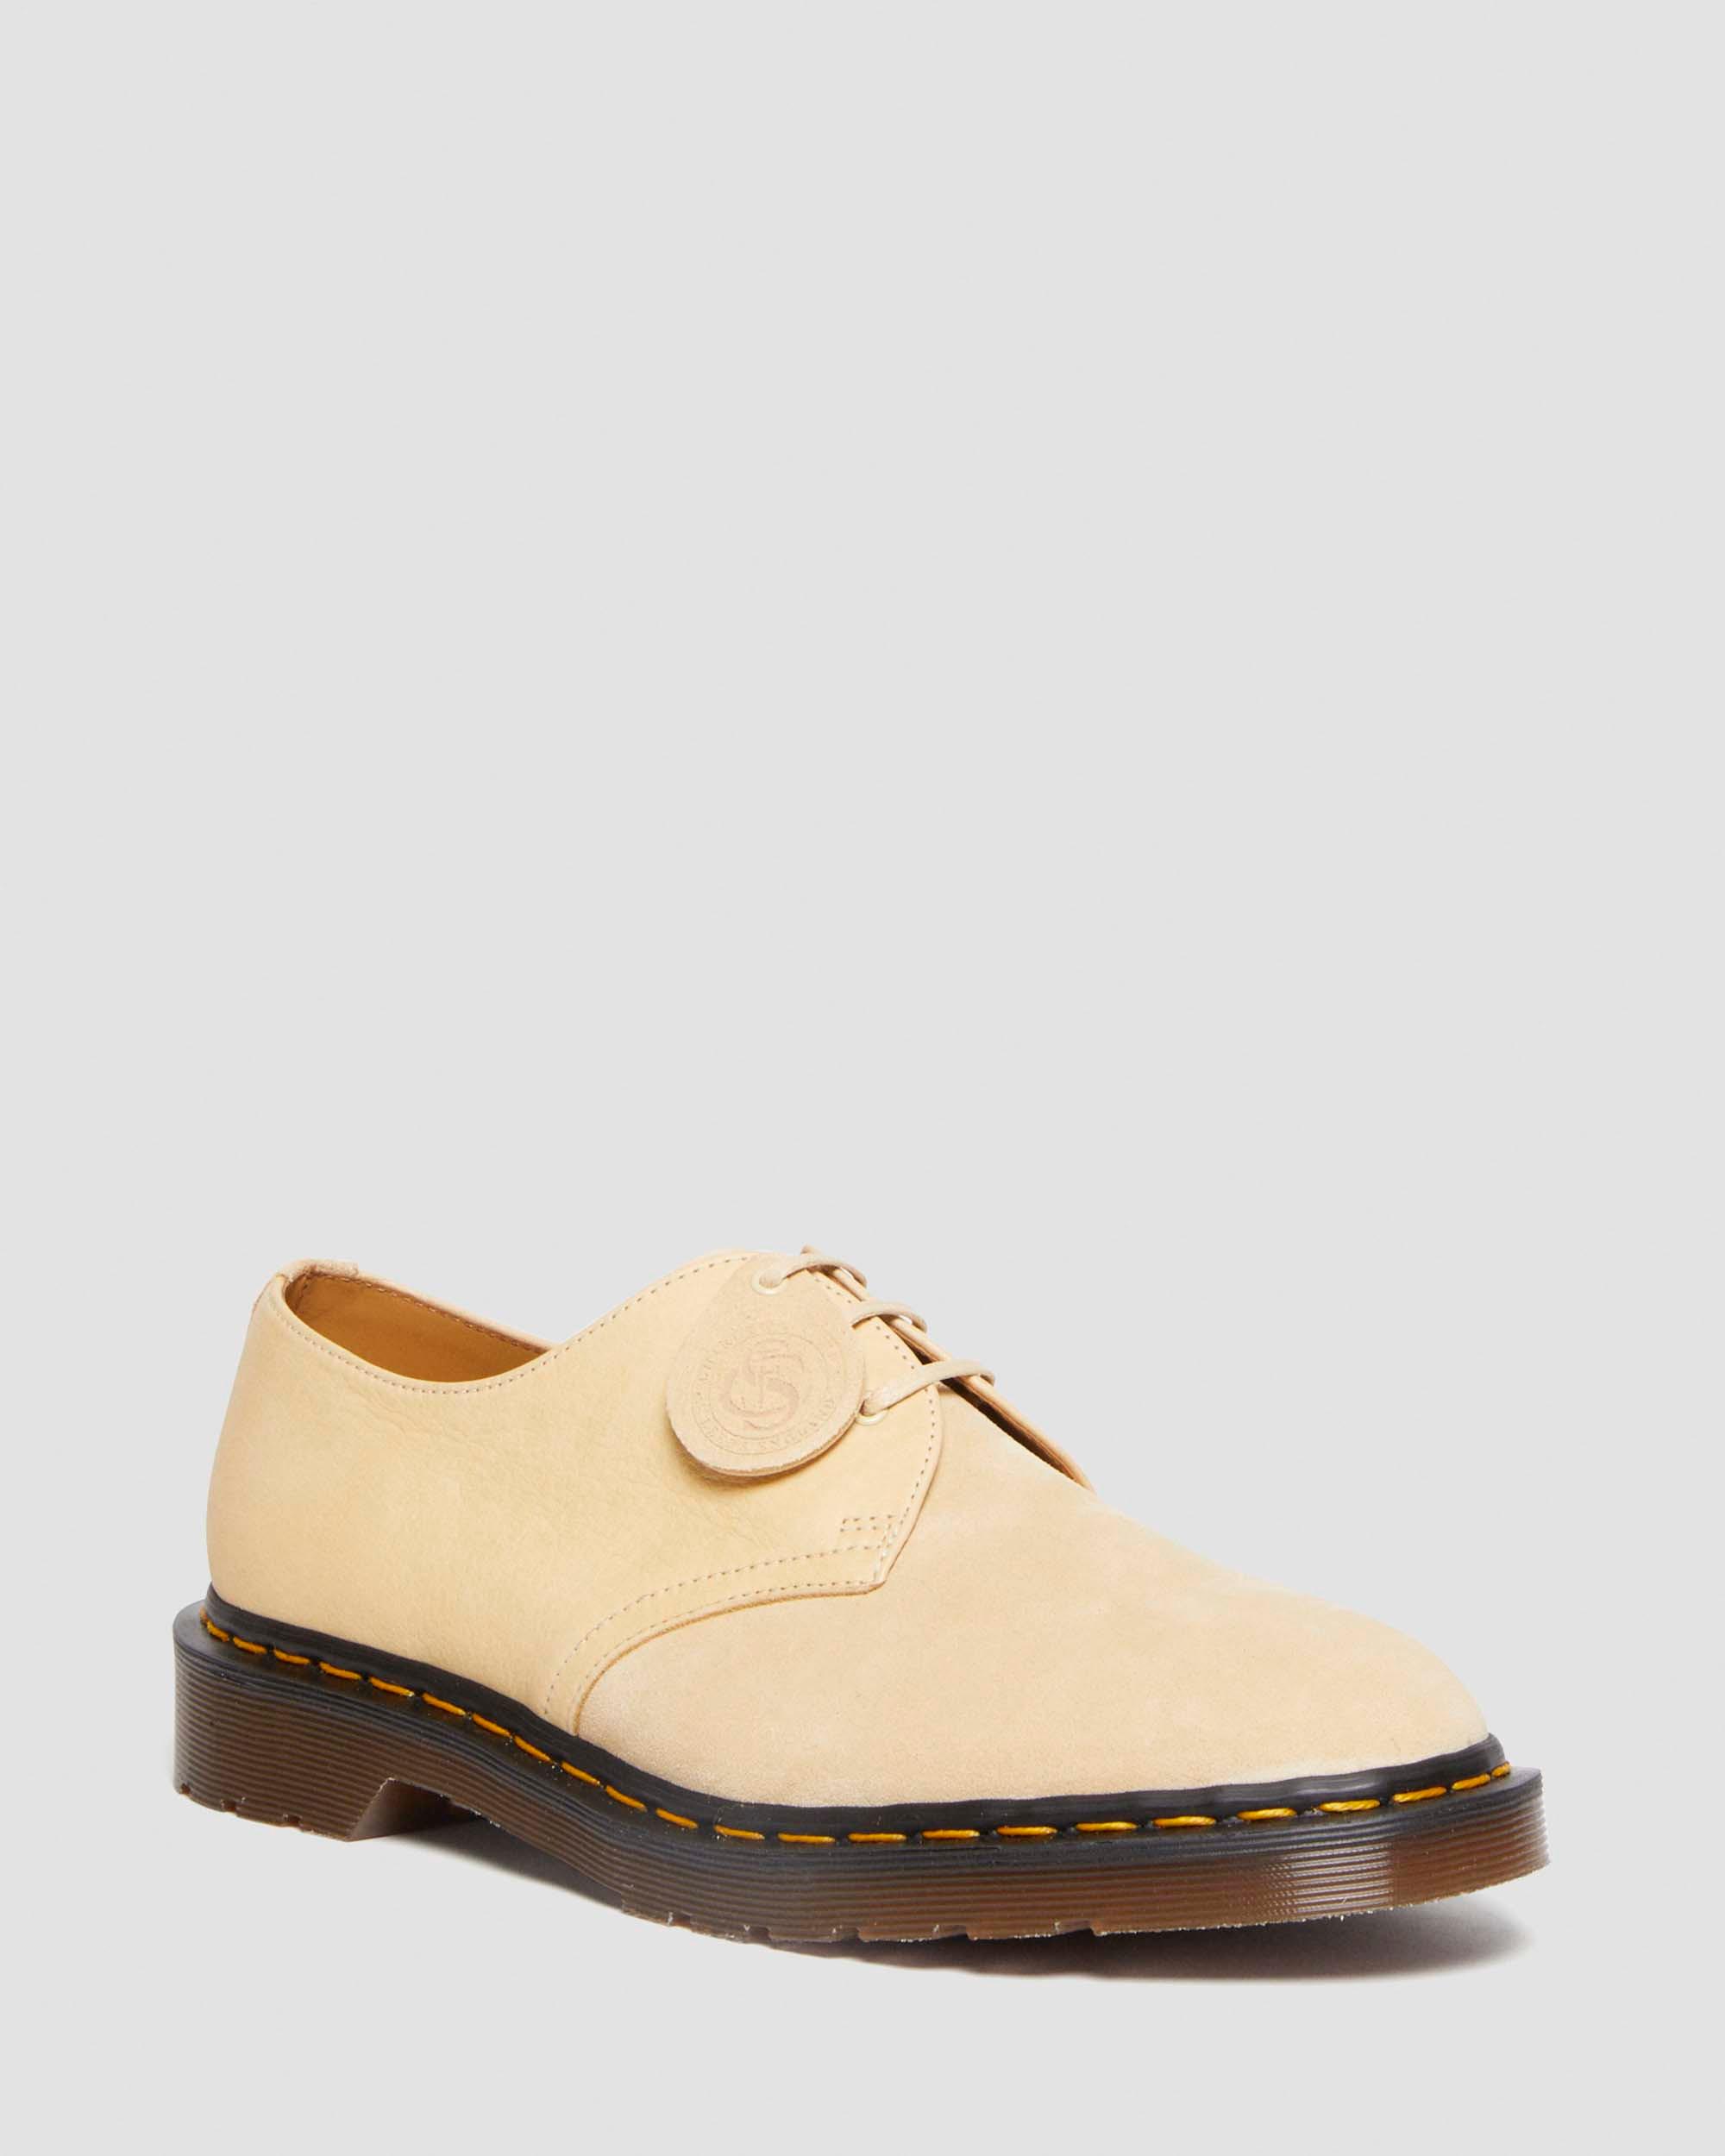 1461 Made in England Suede Oxford Shoes in Mustard | Dr. Martens